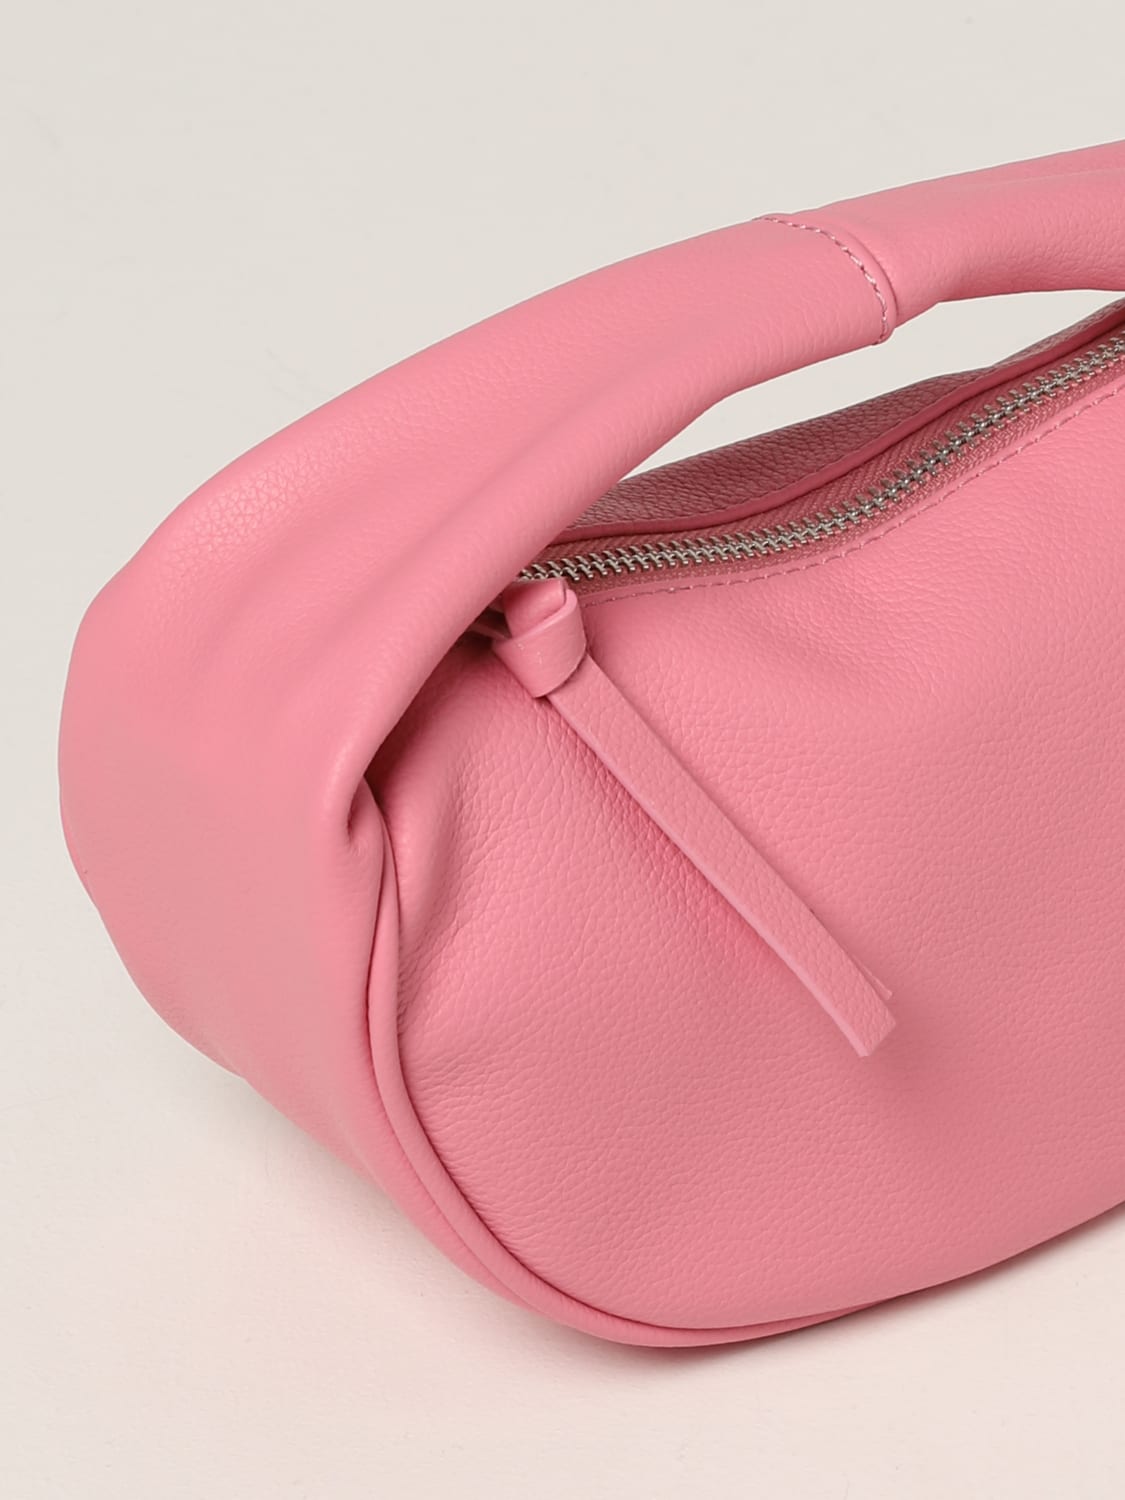 BY FAR: Cush baby bag in textured leather - Pink | By Far handbag 